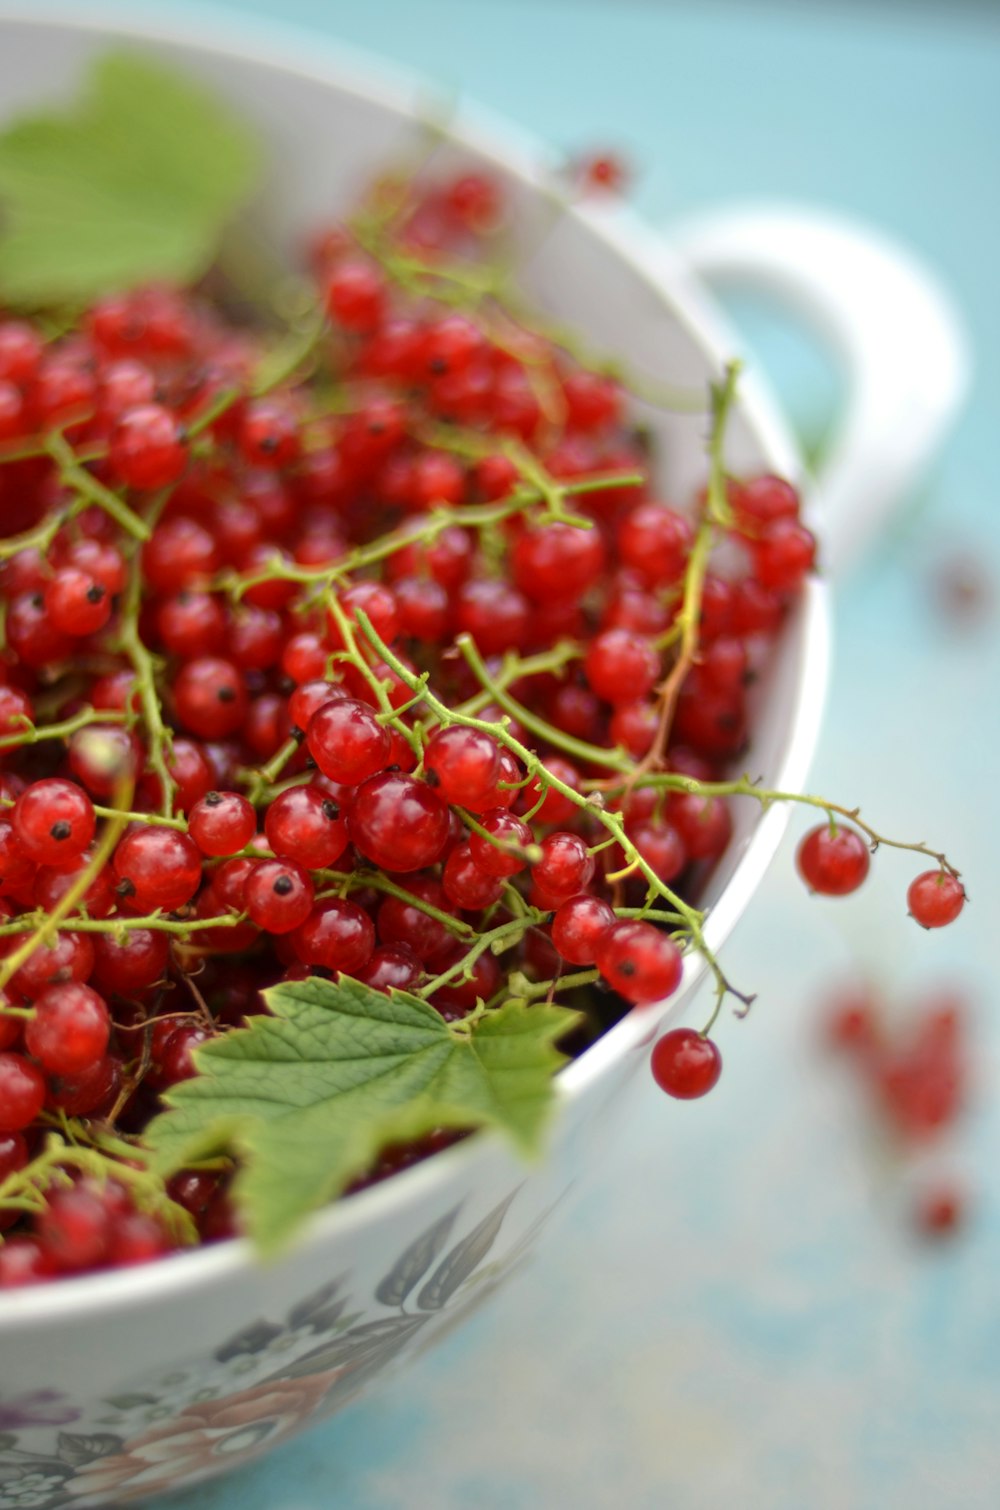 a white bowl filled with red berries and green leaves